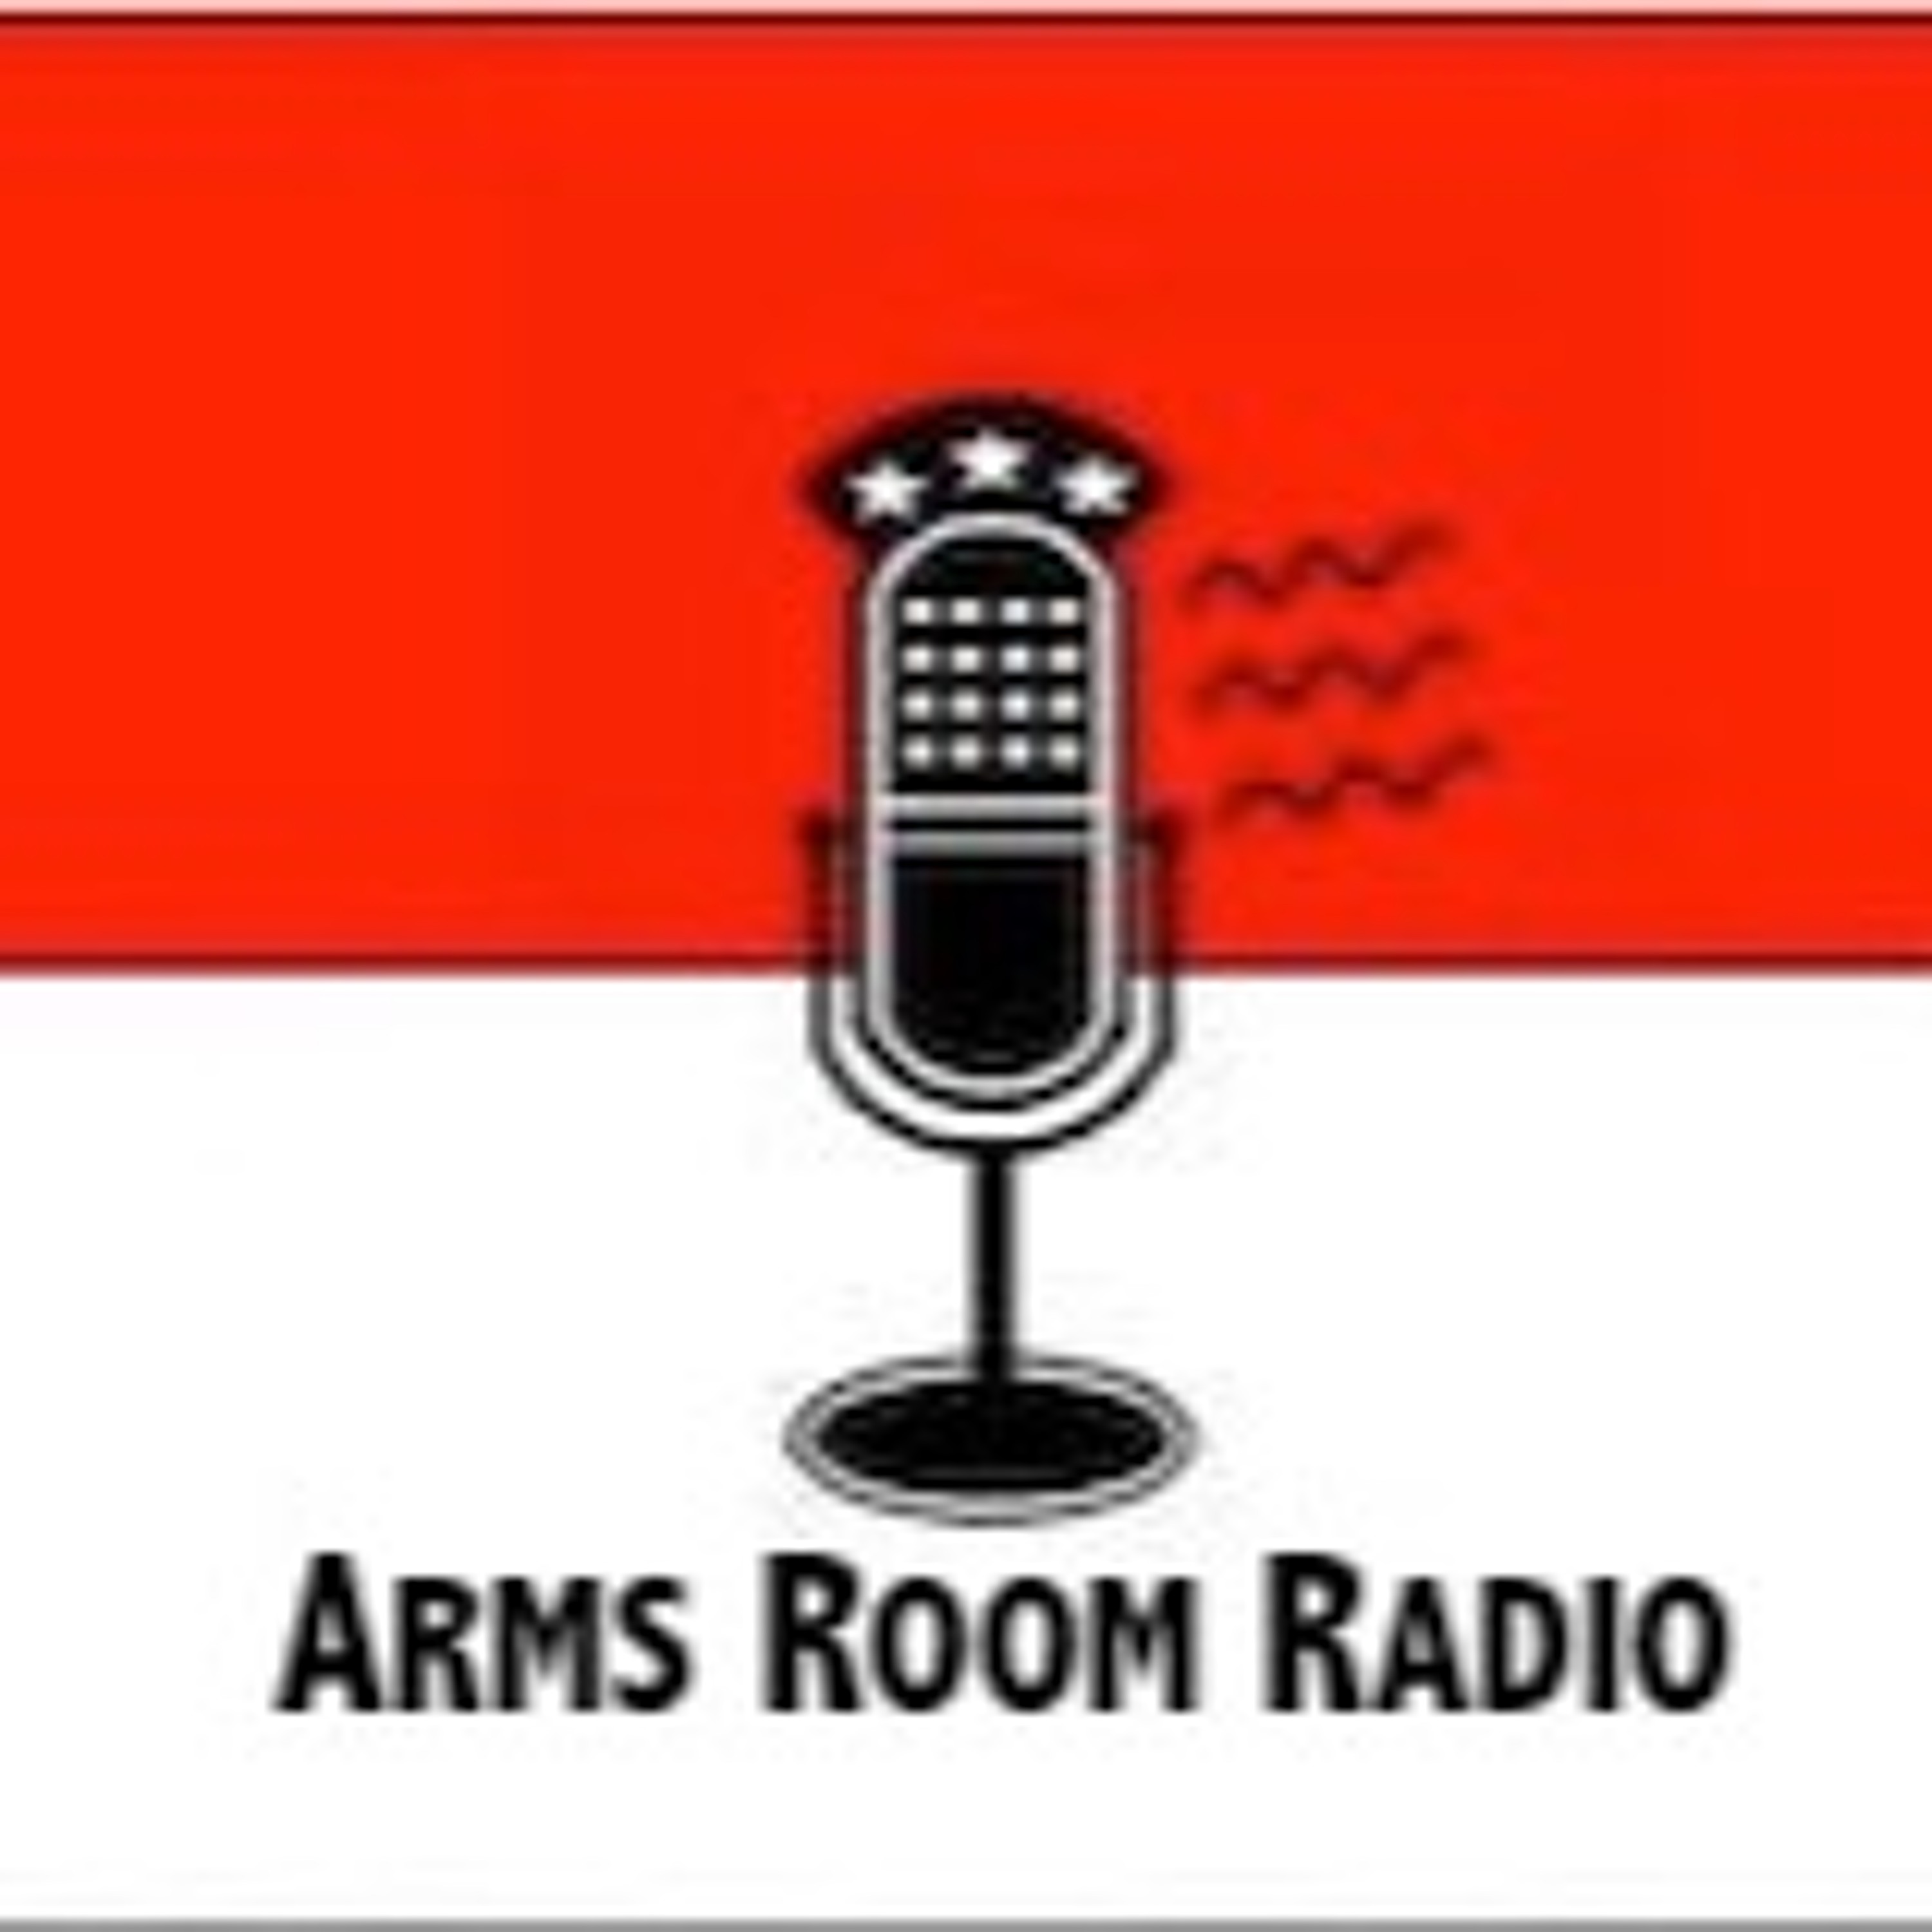 ArmsRoomRadio 02.27.21 Constitutional Carry and the police